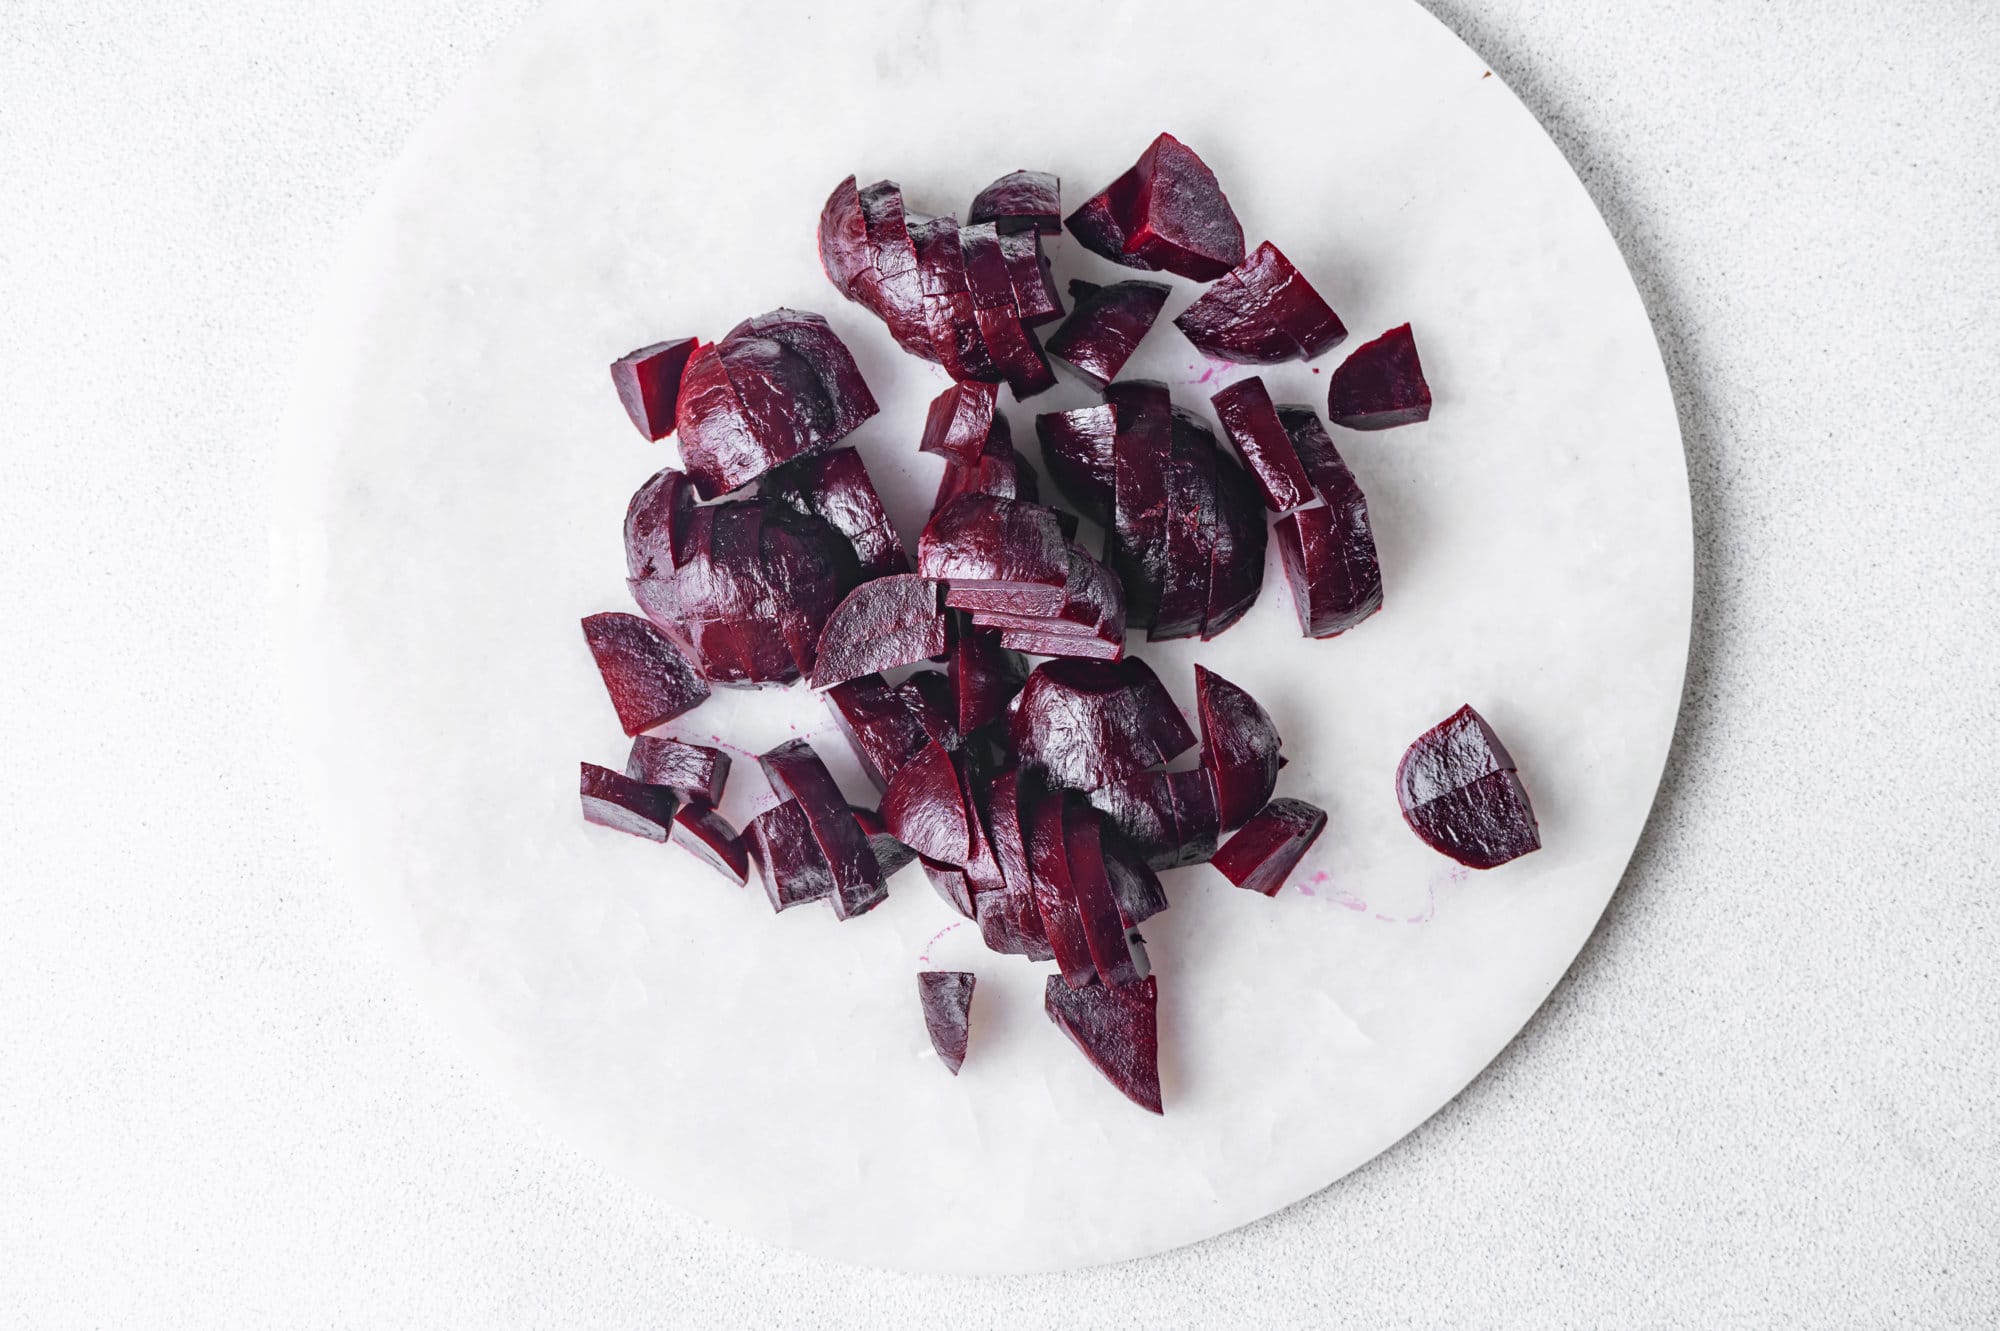 roasted-beets-peeled-and-sliced-on-a-white-plate-for-beet-salad